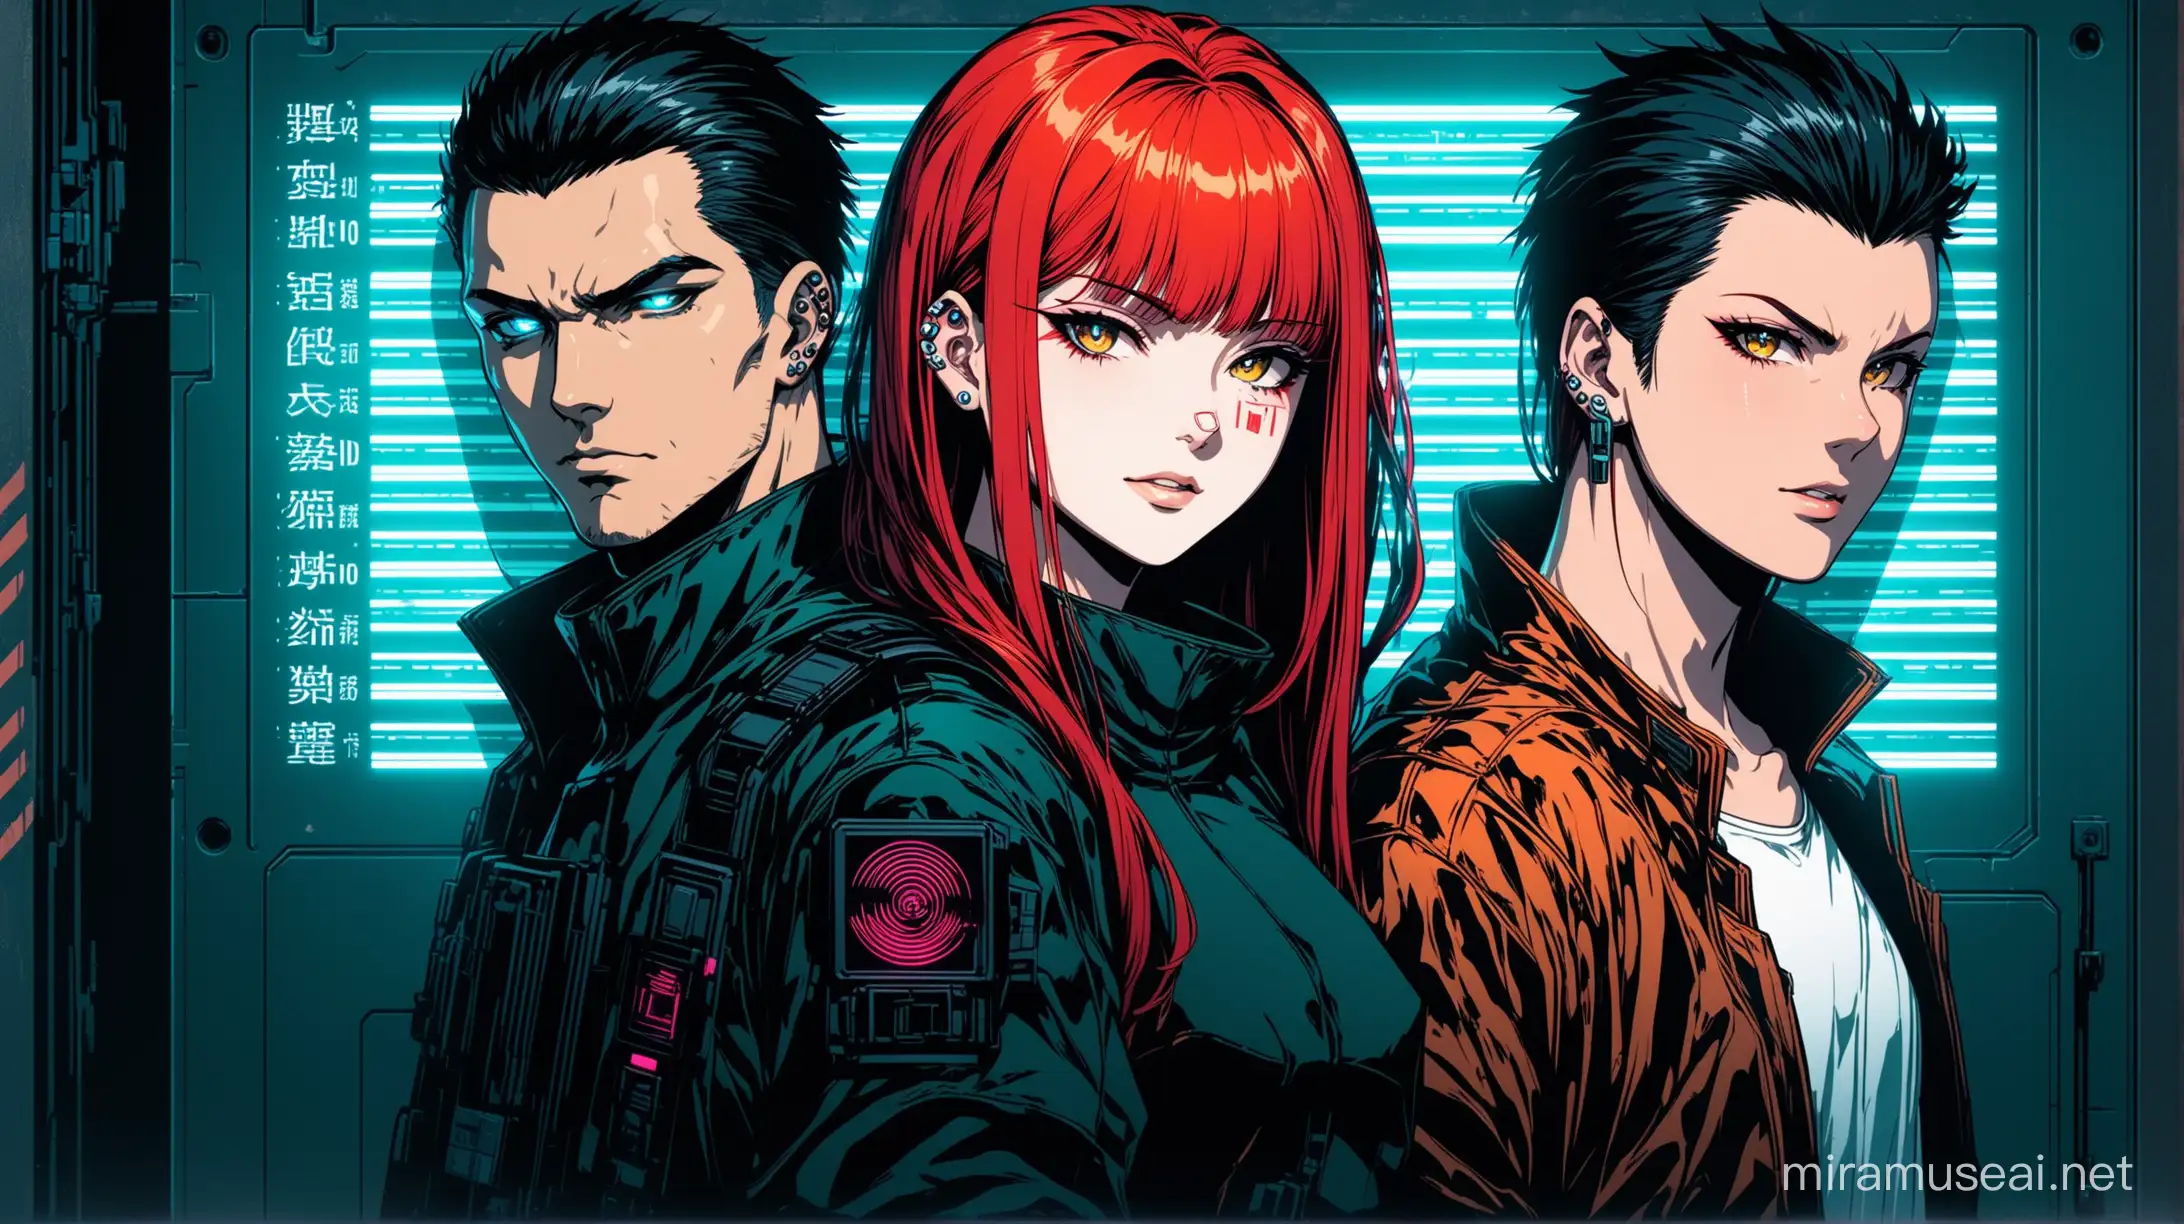 Twin Cyberpunk Mugshot RedHaired Siblings in Futuristic Anime Style